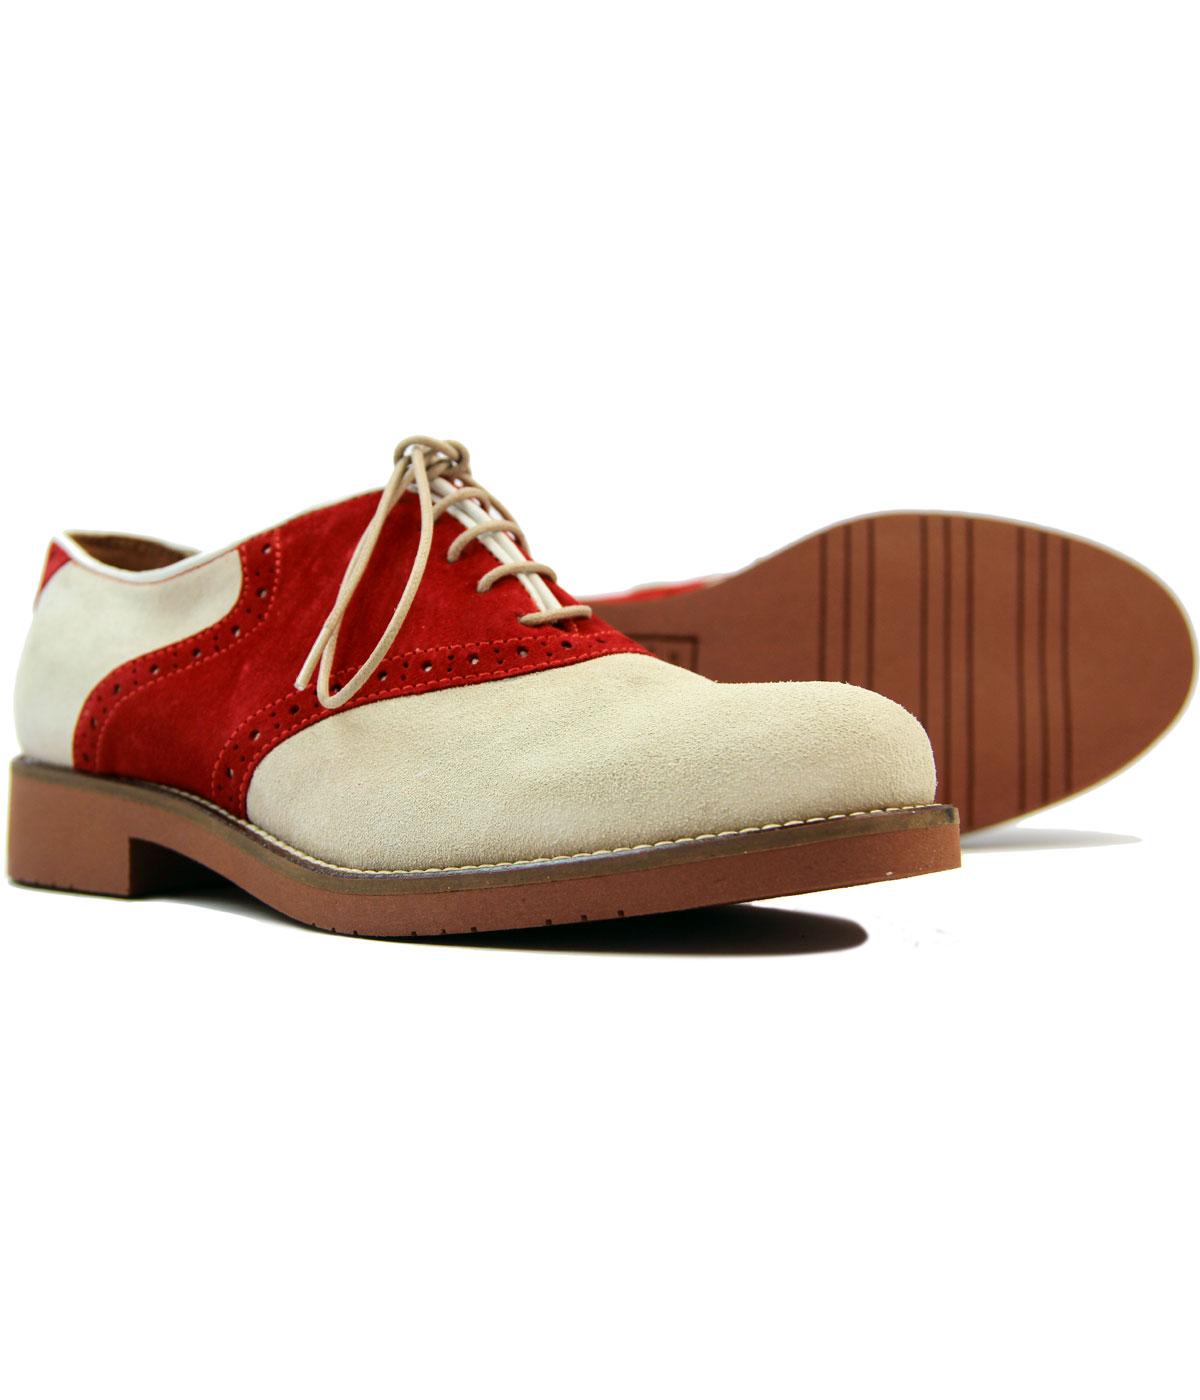 BASS WEEJUNS Albany Retro 60s Mod Suede Oxford Saddle Shoes Red